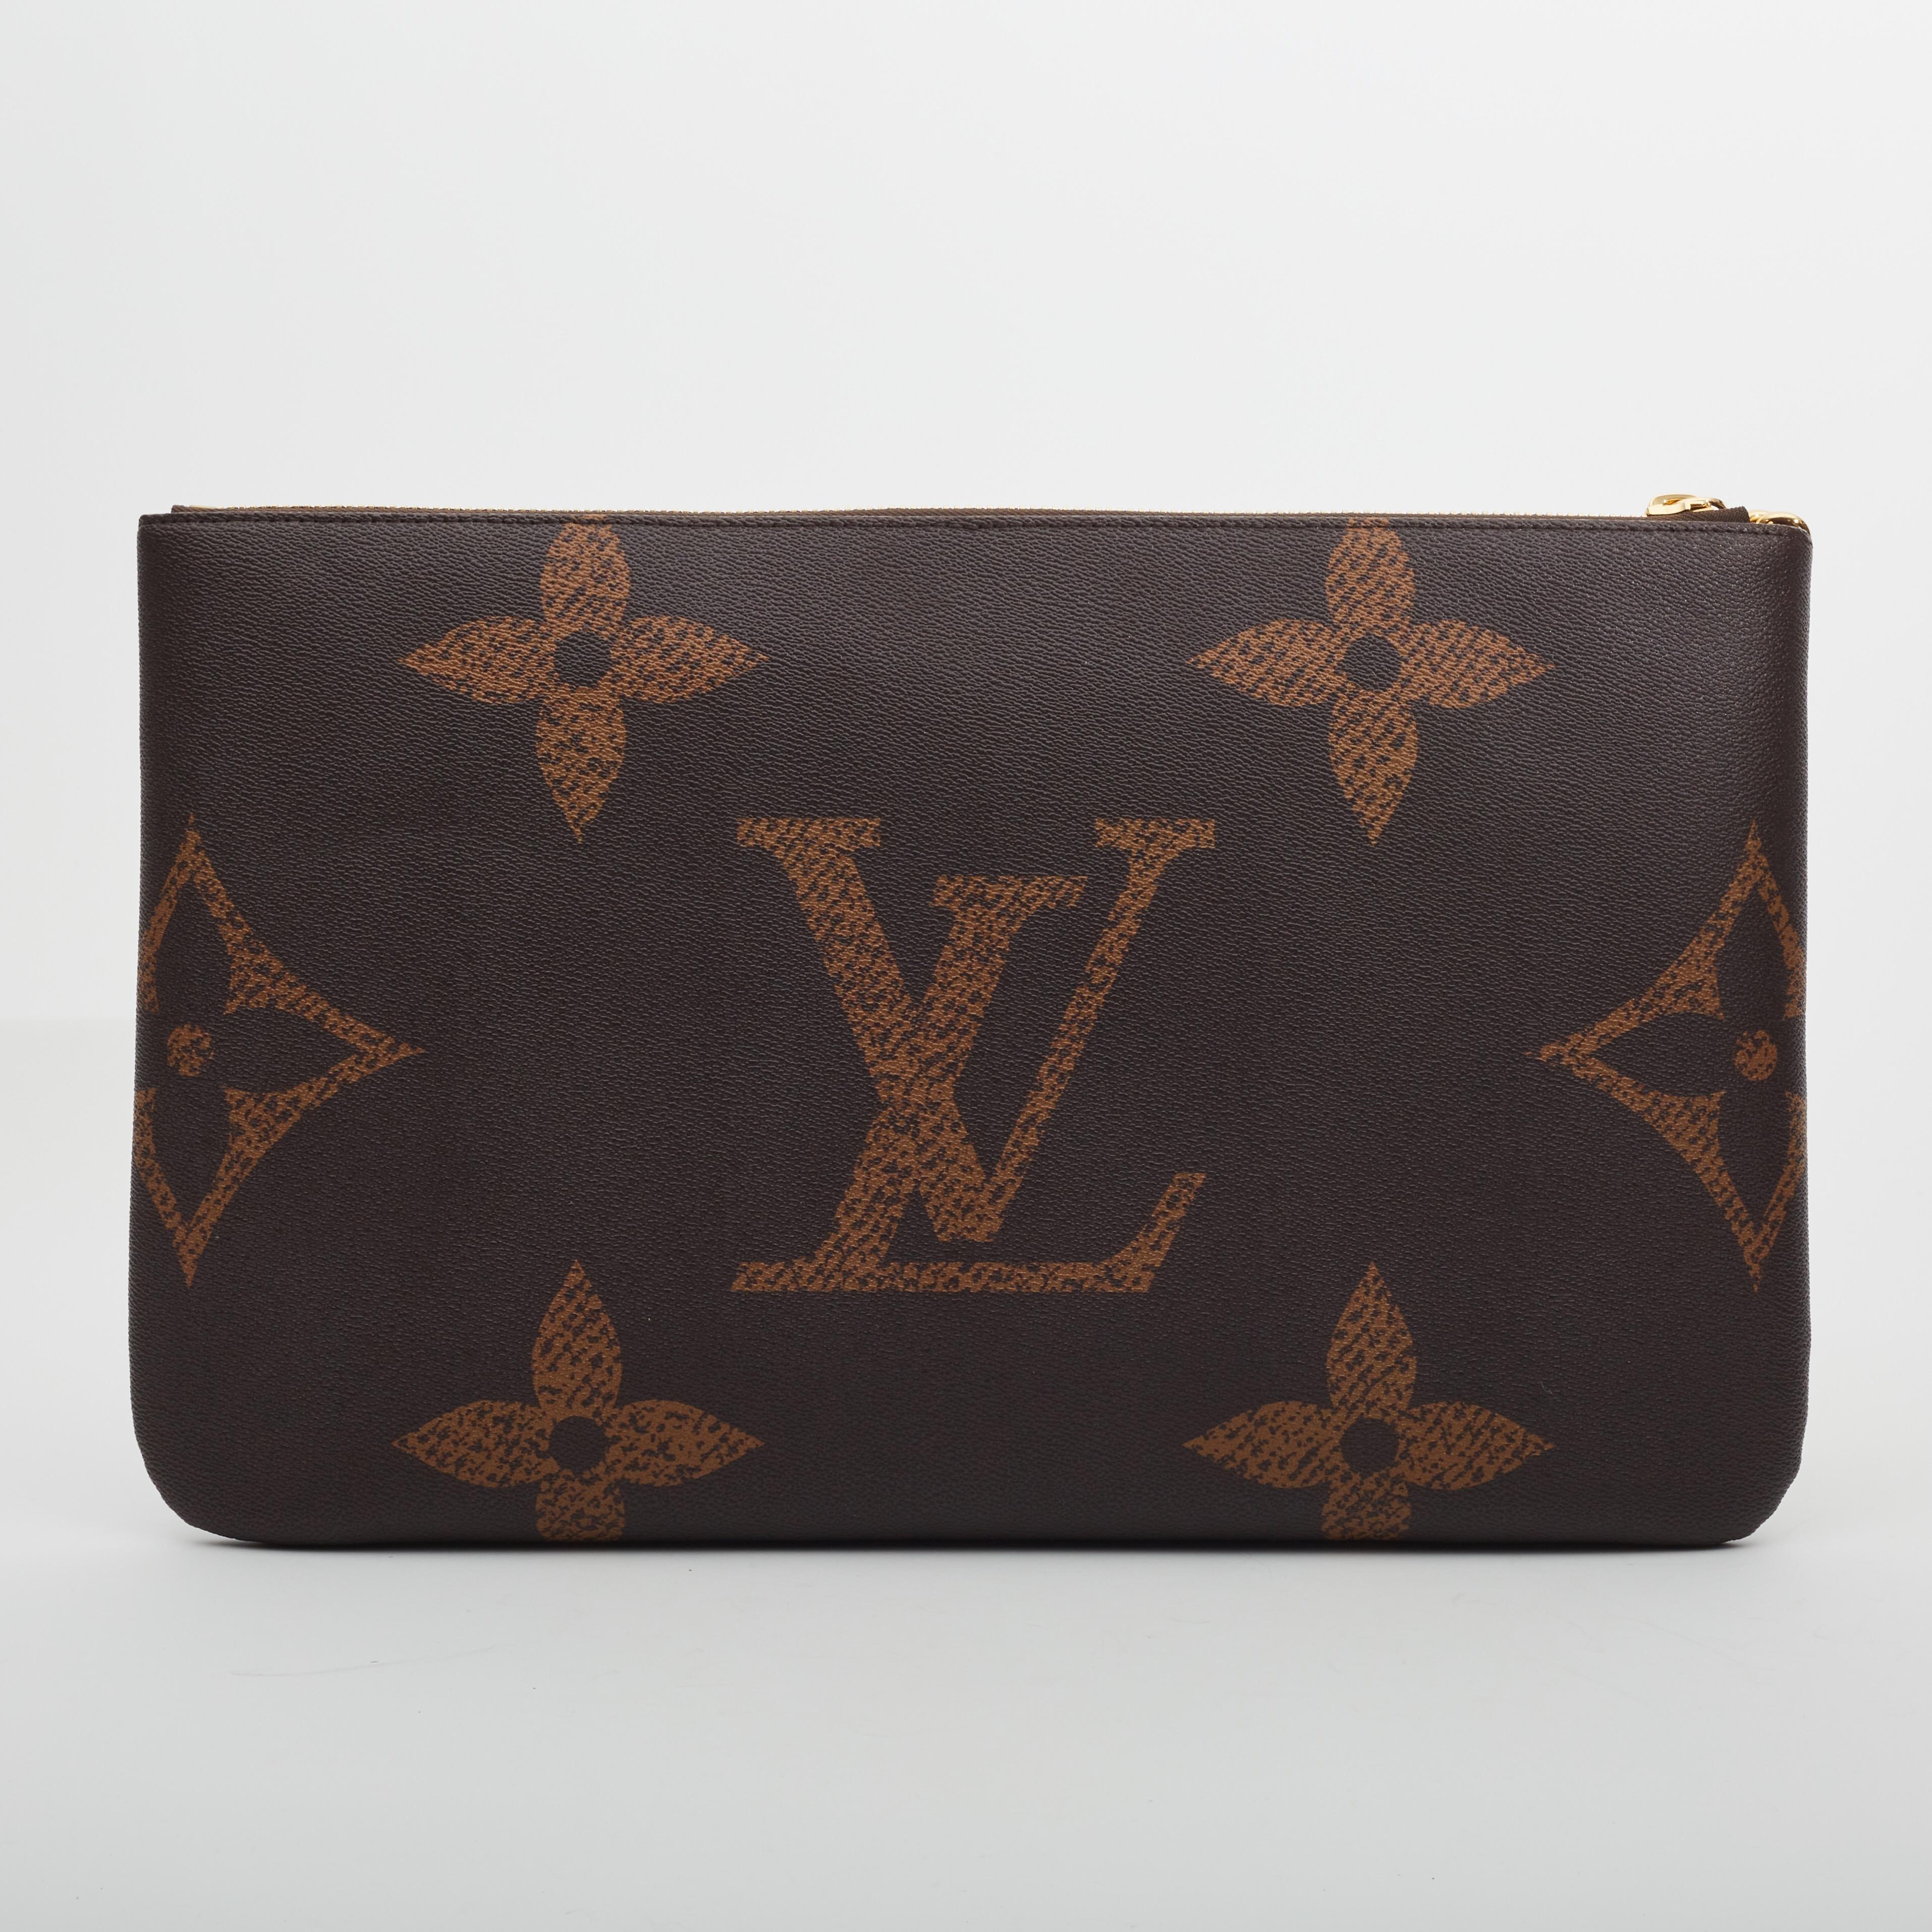 The Pochette Clés XL pouch was one of the stars of the Spring-Summer 2023 show, during which Nicolas Ghesquière enlarged signature Louis Vuitton details and small iconic shapes into full-size bags and clutches.

Here the House’s Key mini Pouch is